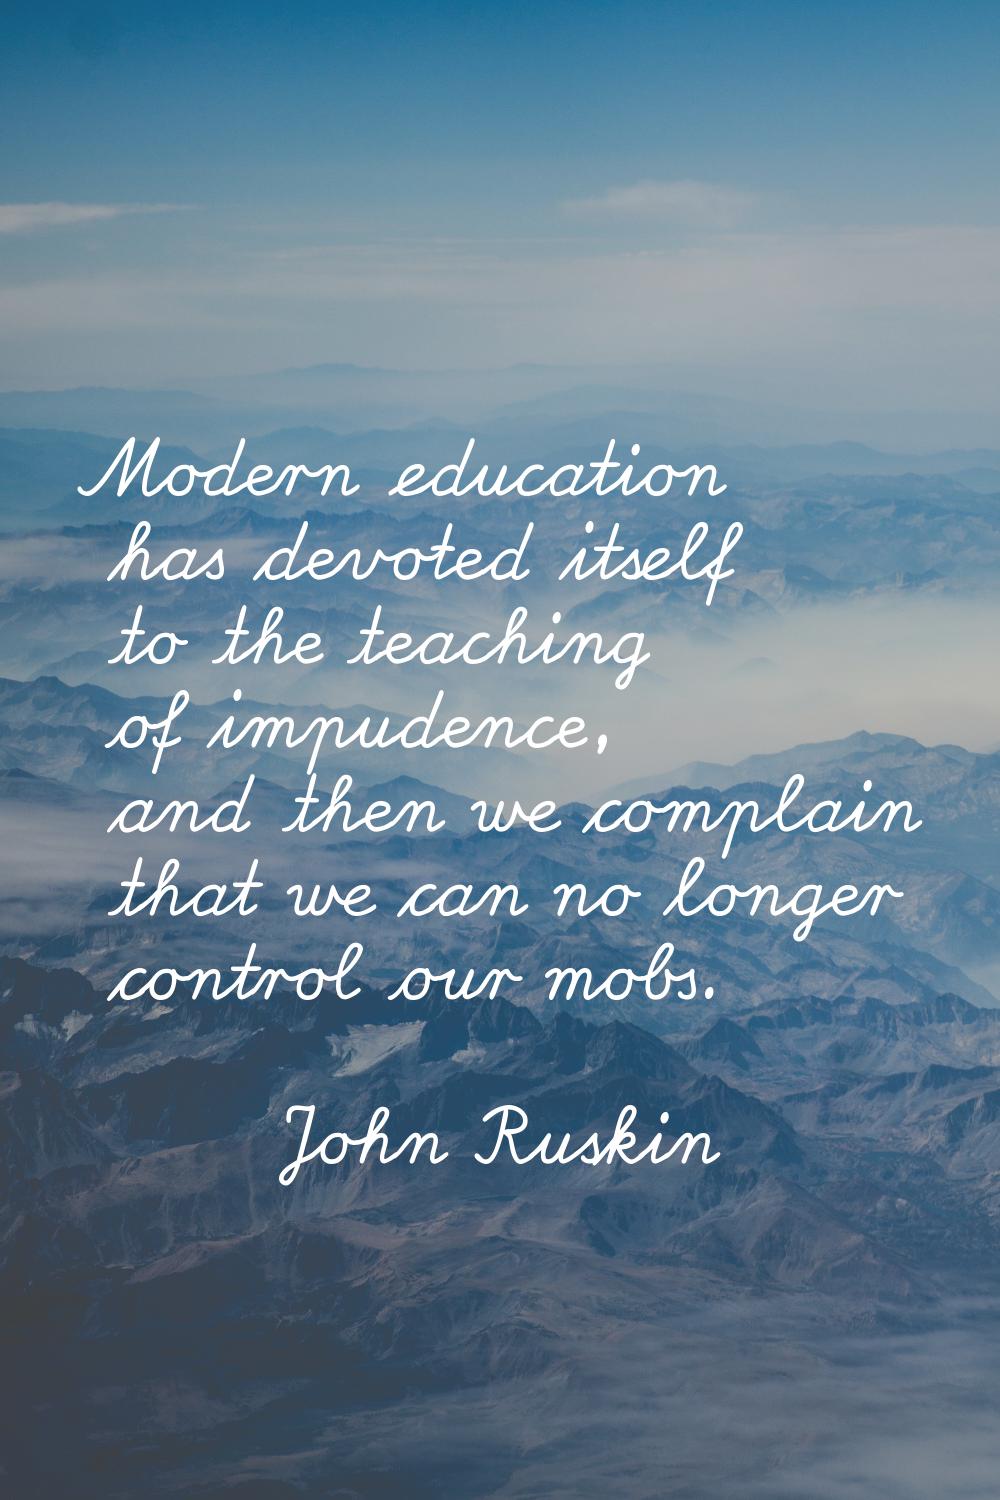 Modern education has devoted itself to the teaching of impudence, and then we complain that we can 